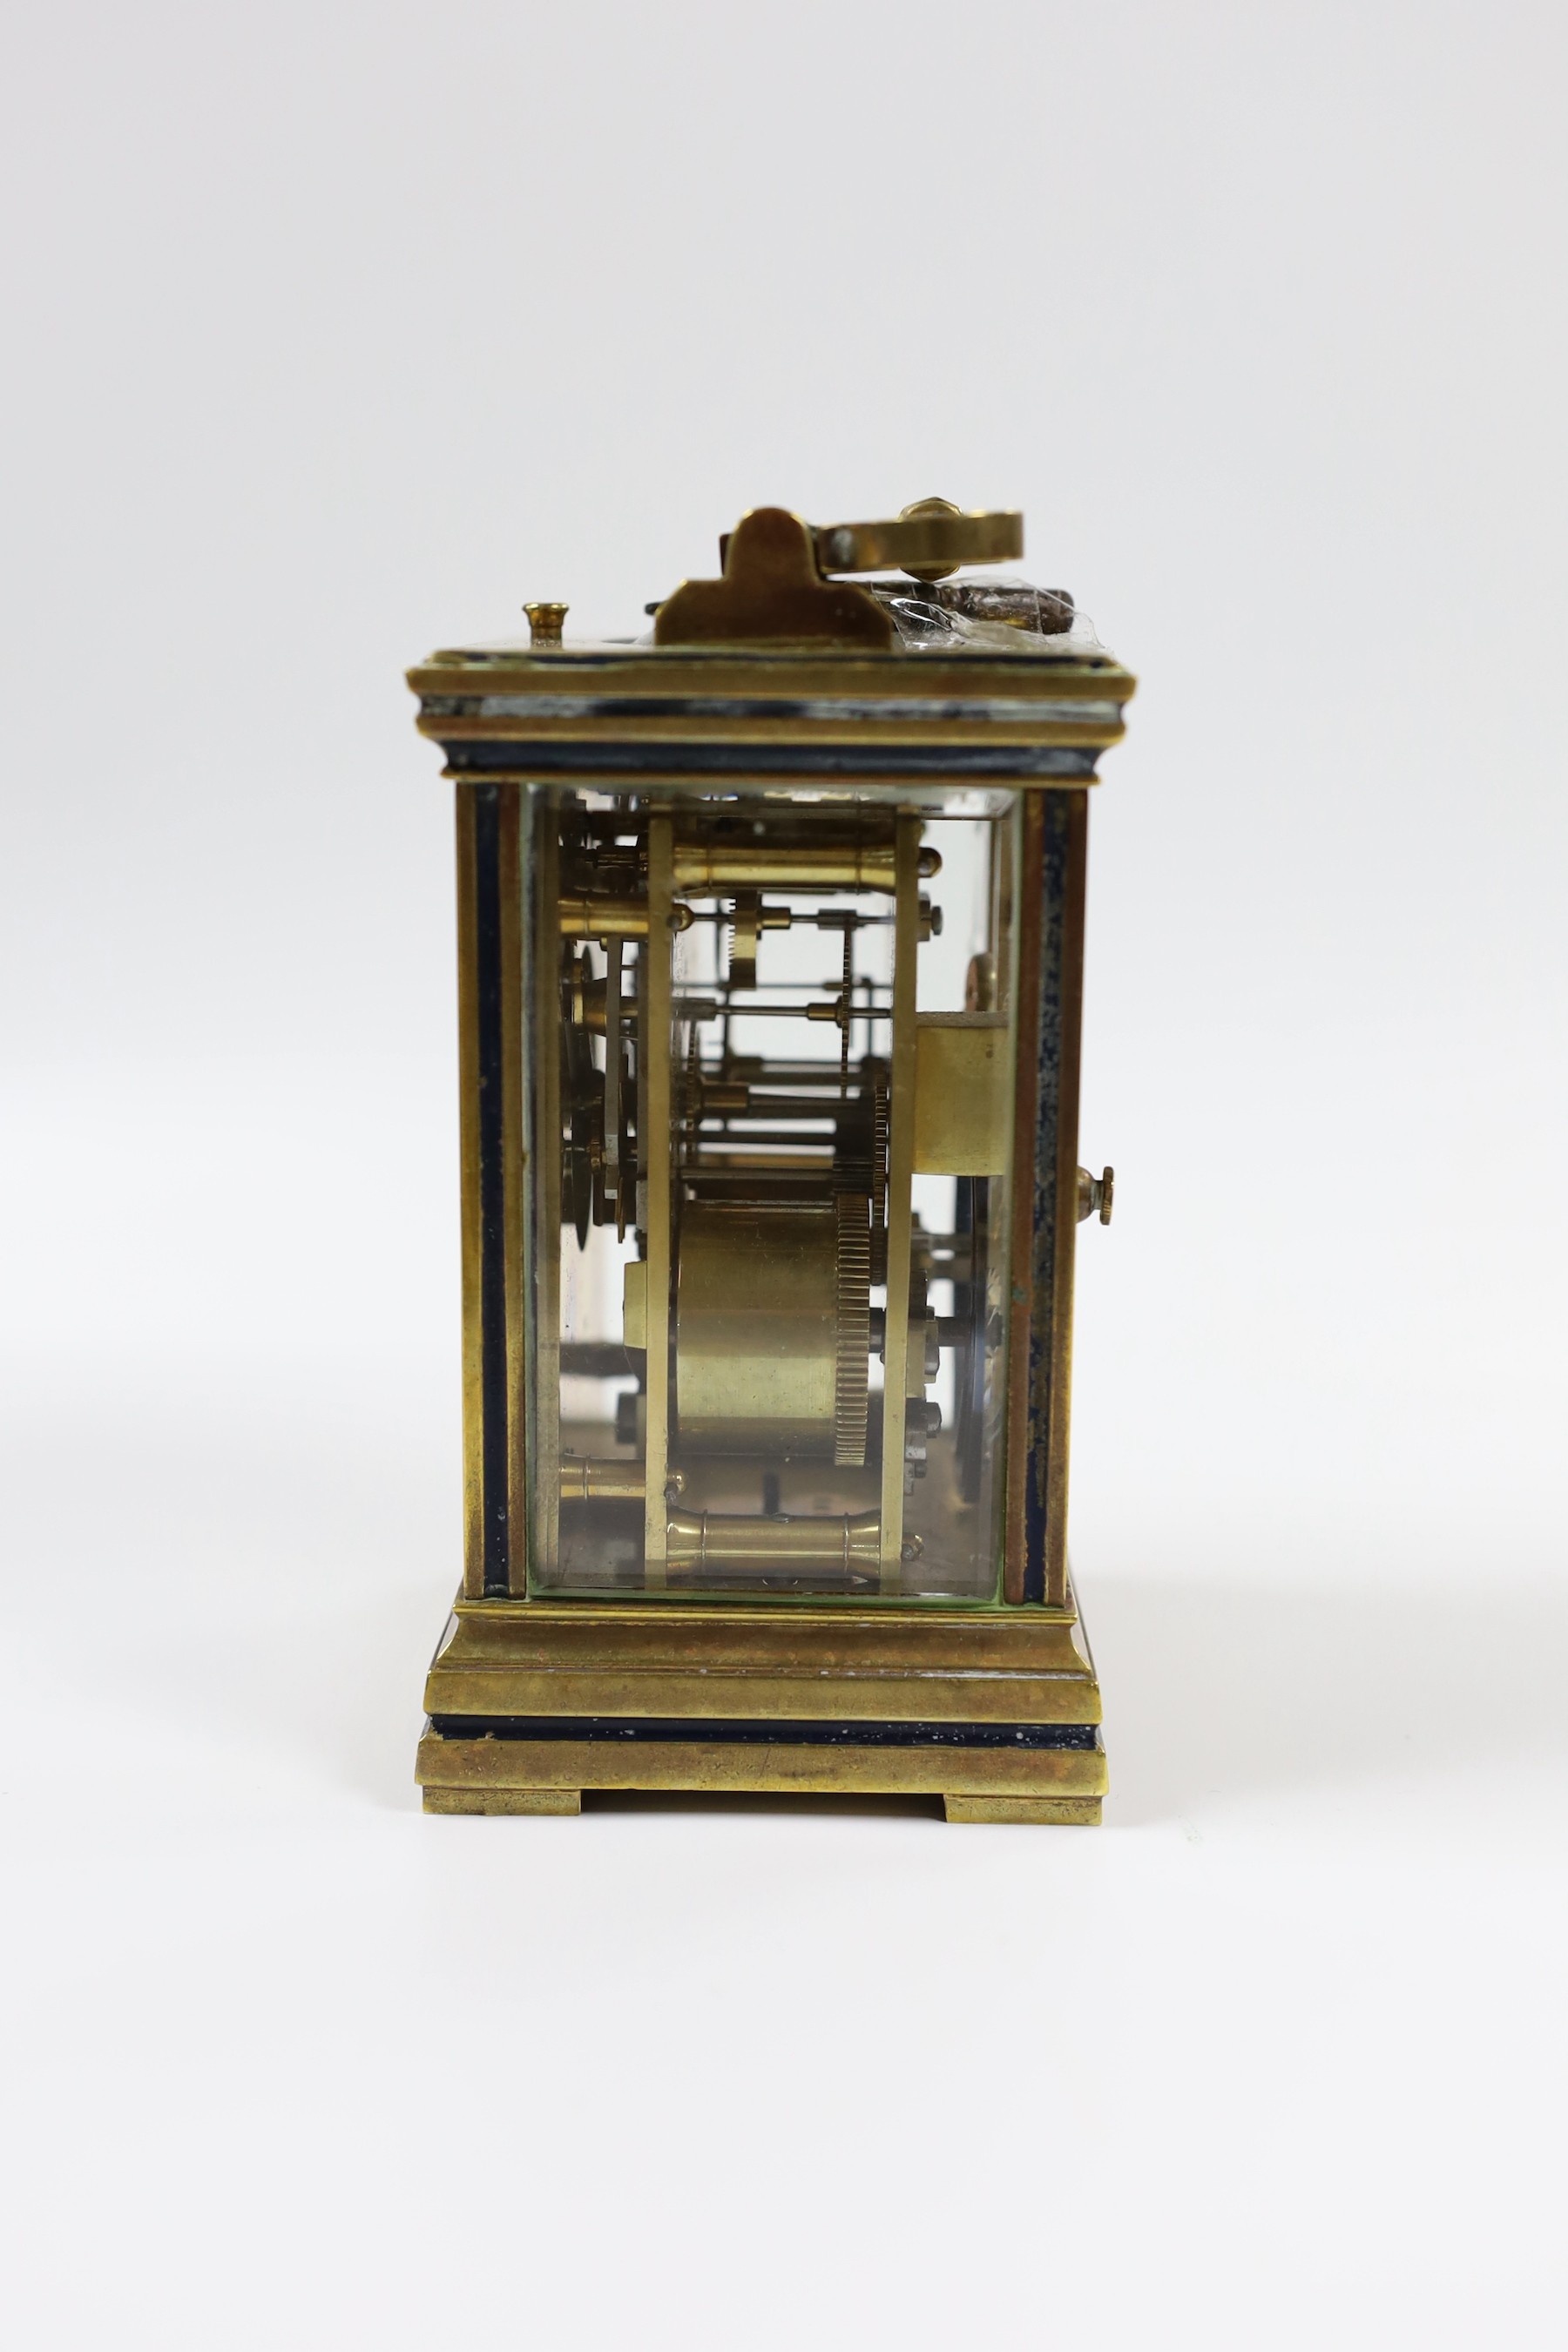 A French Mackay & Chisholm timepiece, with key, 13cm tall